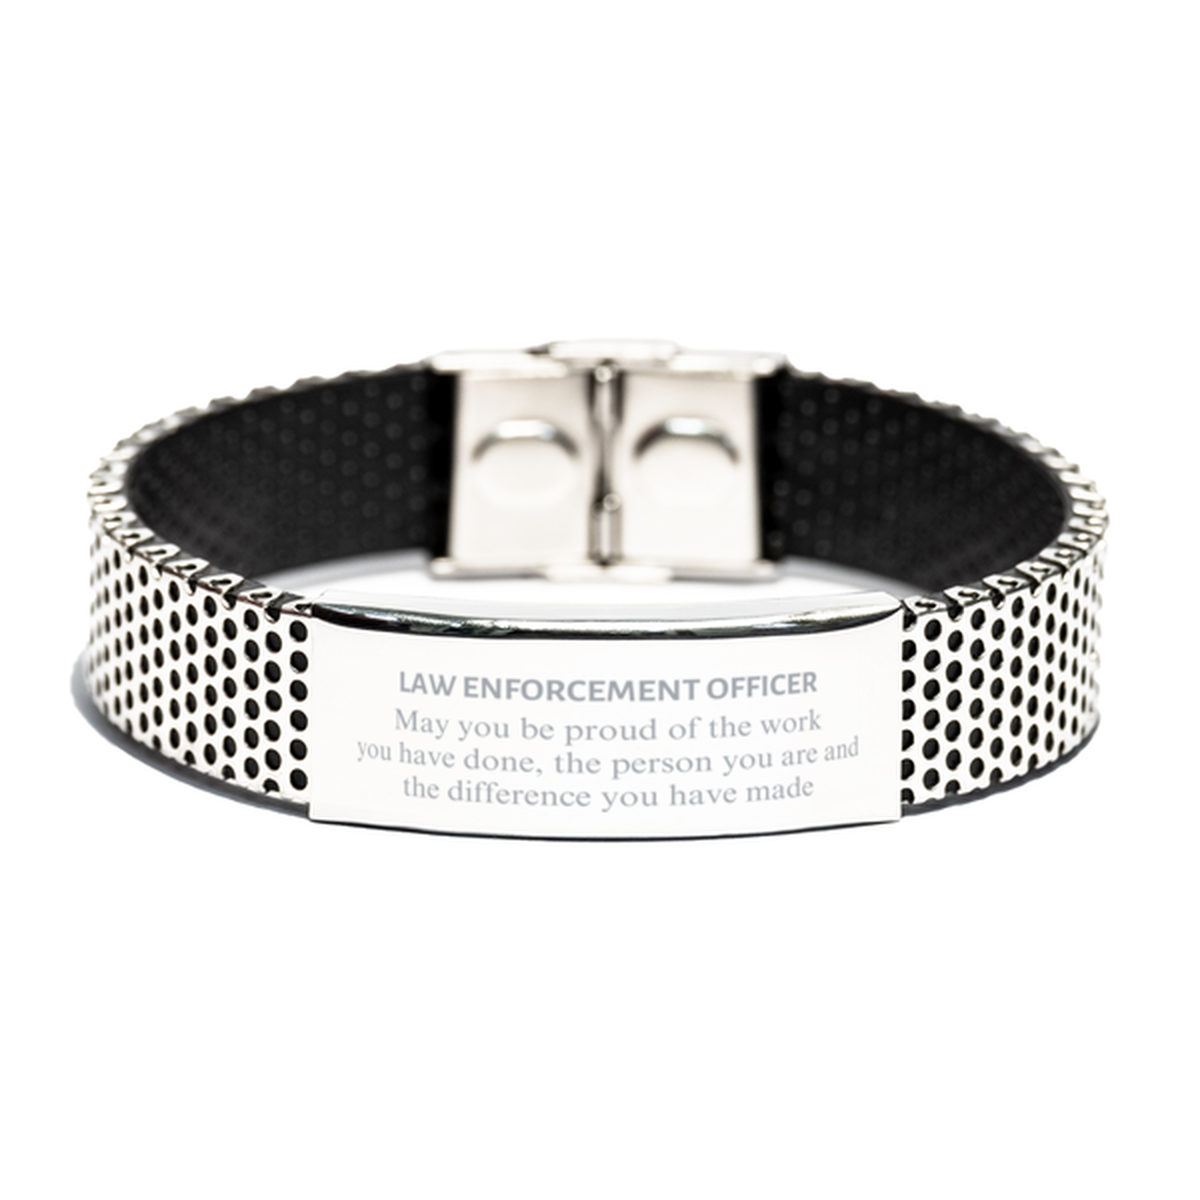 Law Enforcement Officer May you be proud of the work you have done, Retirement Law Enforcement Officer Stainless Steel Bracelet for Colleague Appreciation Gifts Amazing for Law Enforcement Officer